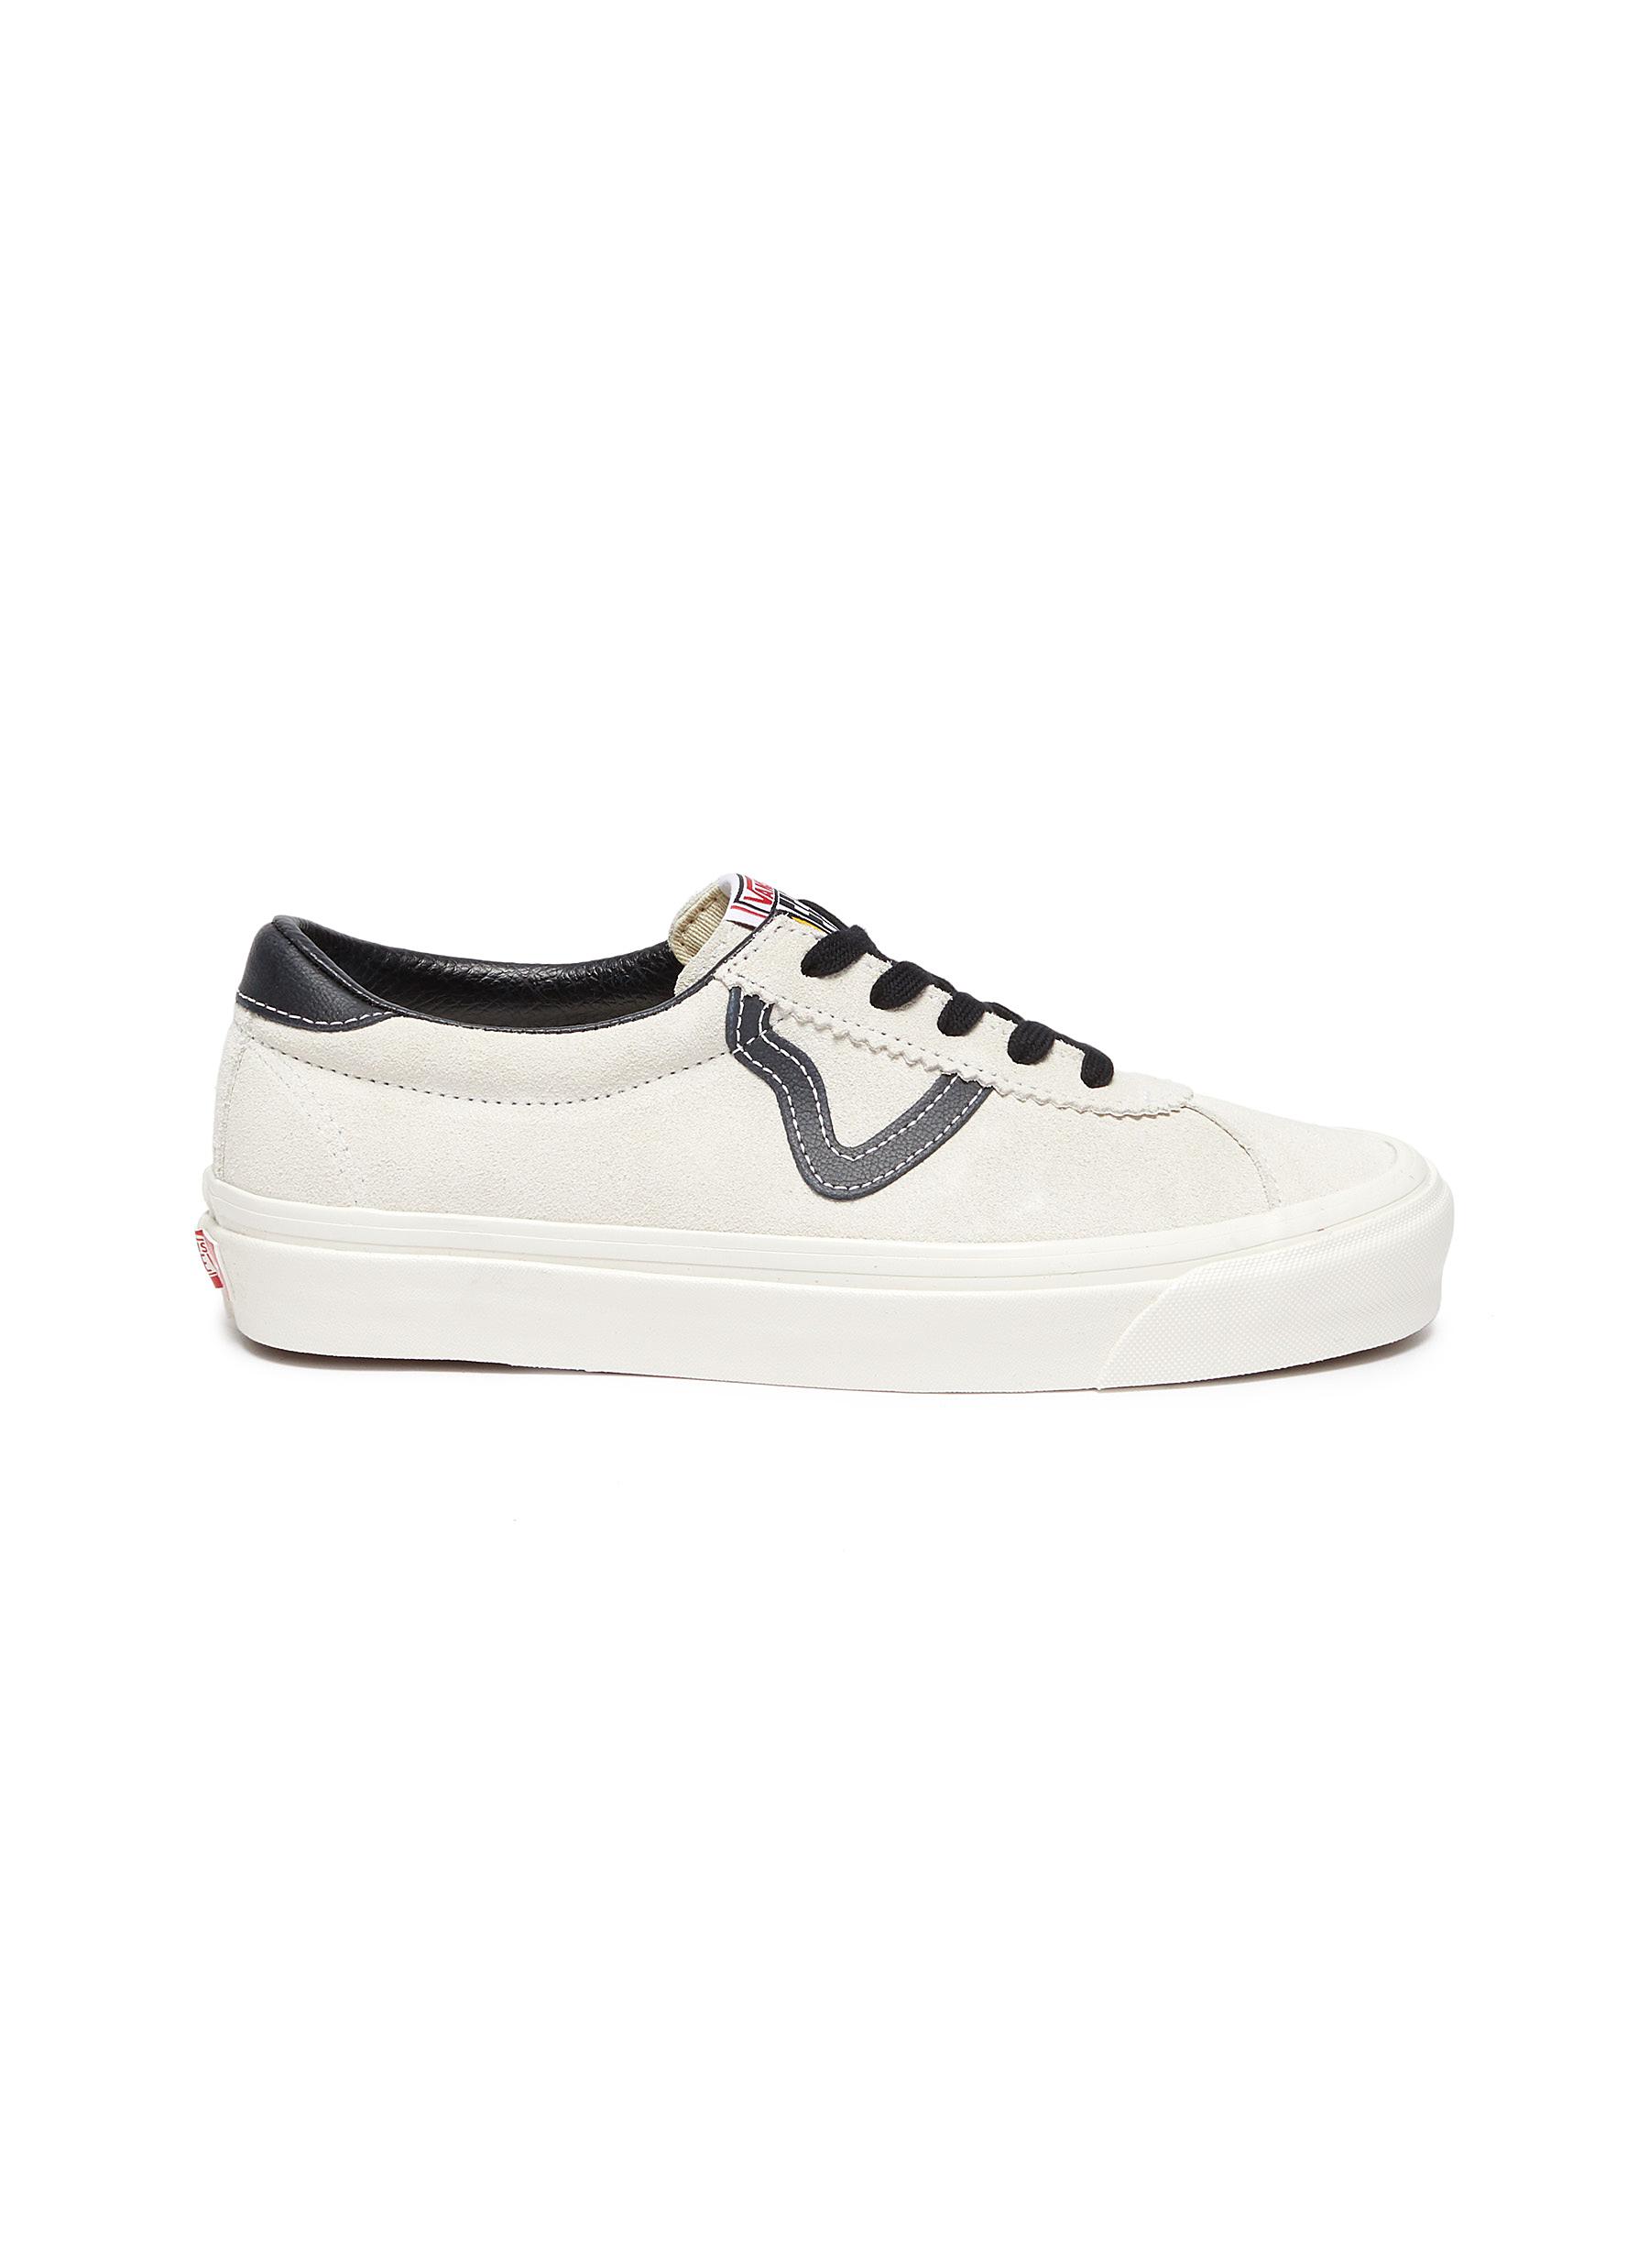 VANS | Style 73' LACE-UP SKATE SNEAKERS 